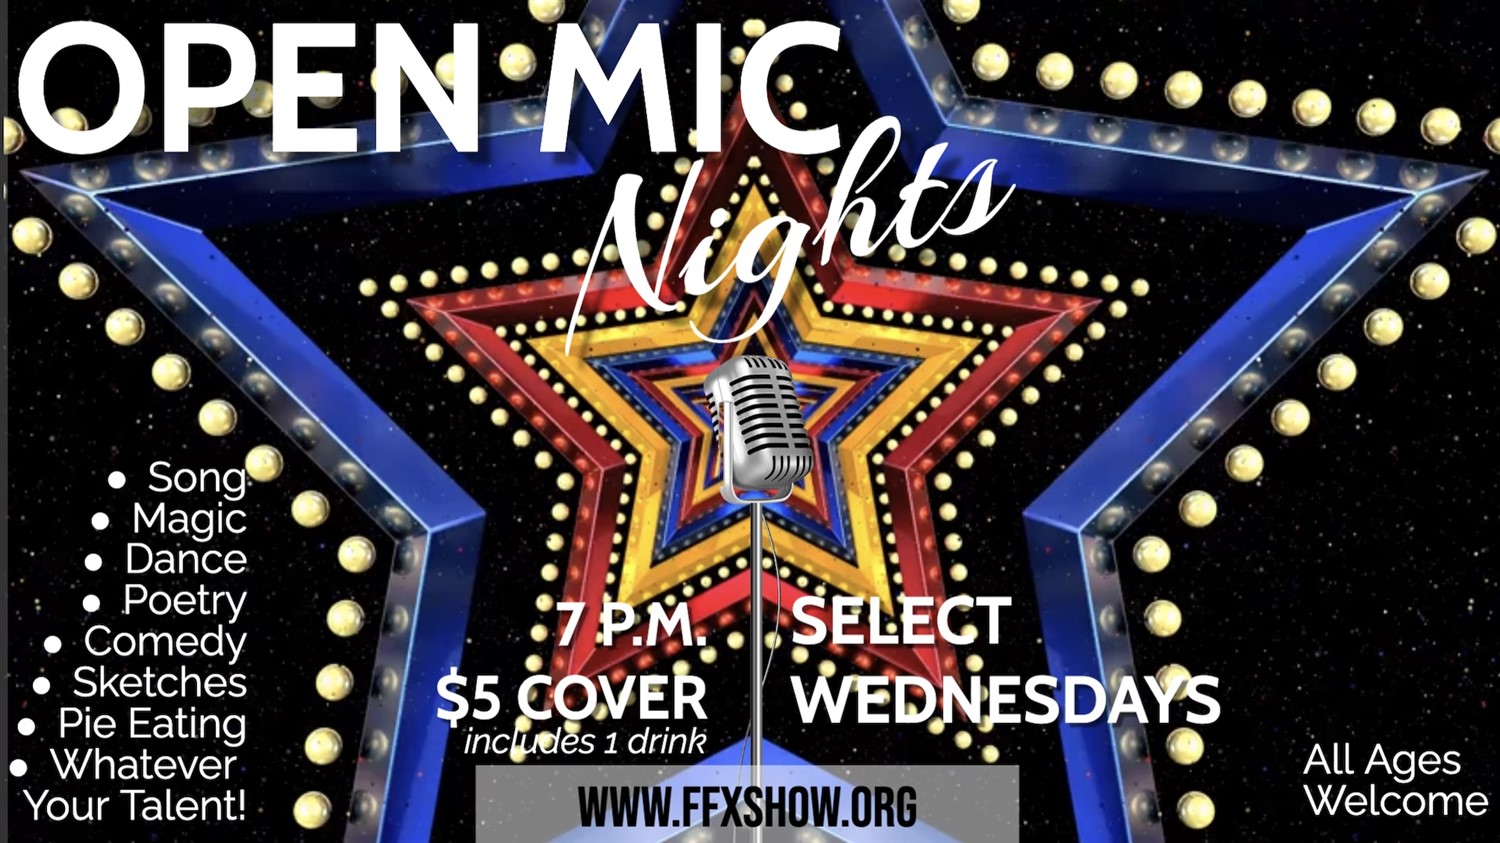 OPEN MIC NIGHT Come out to enjoy, or share your own talent on the FFX Stage! on dic. 14, 19:00@FFX Theatre - Compra entradas y obtén información enFamily Fun Xperience tickets.ffxshow.org